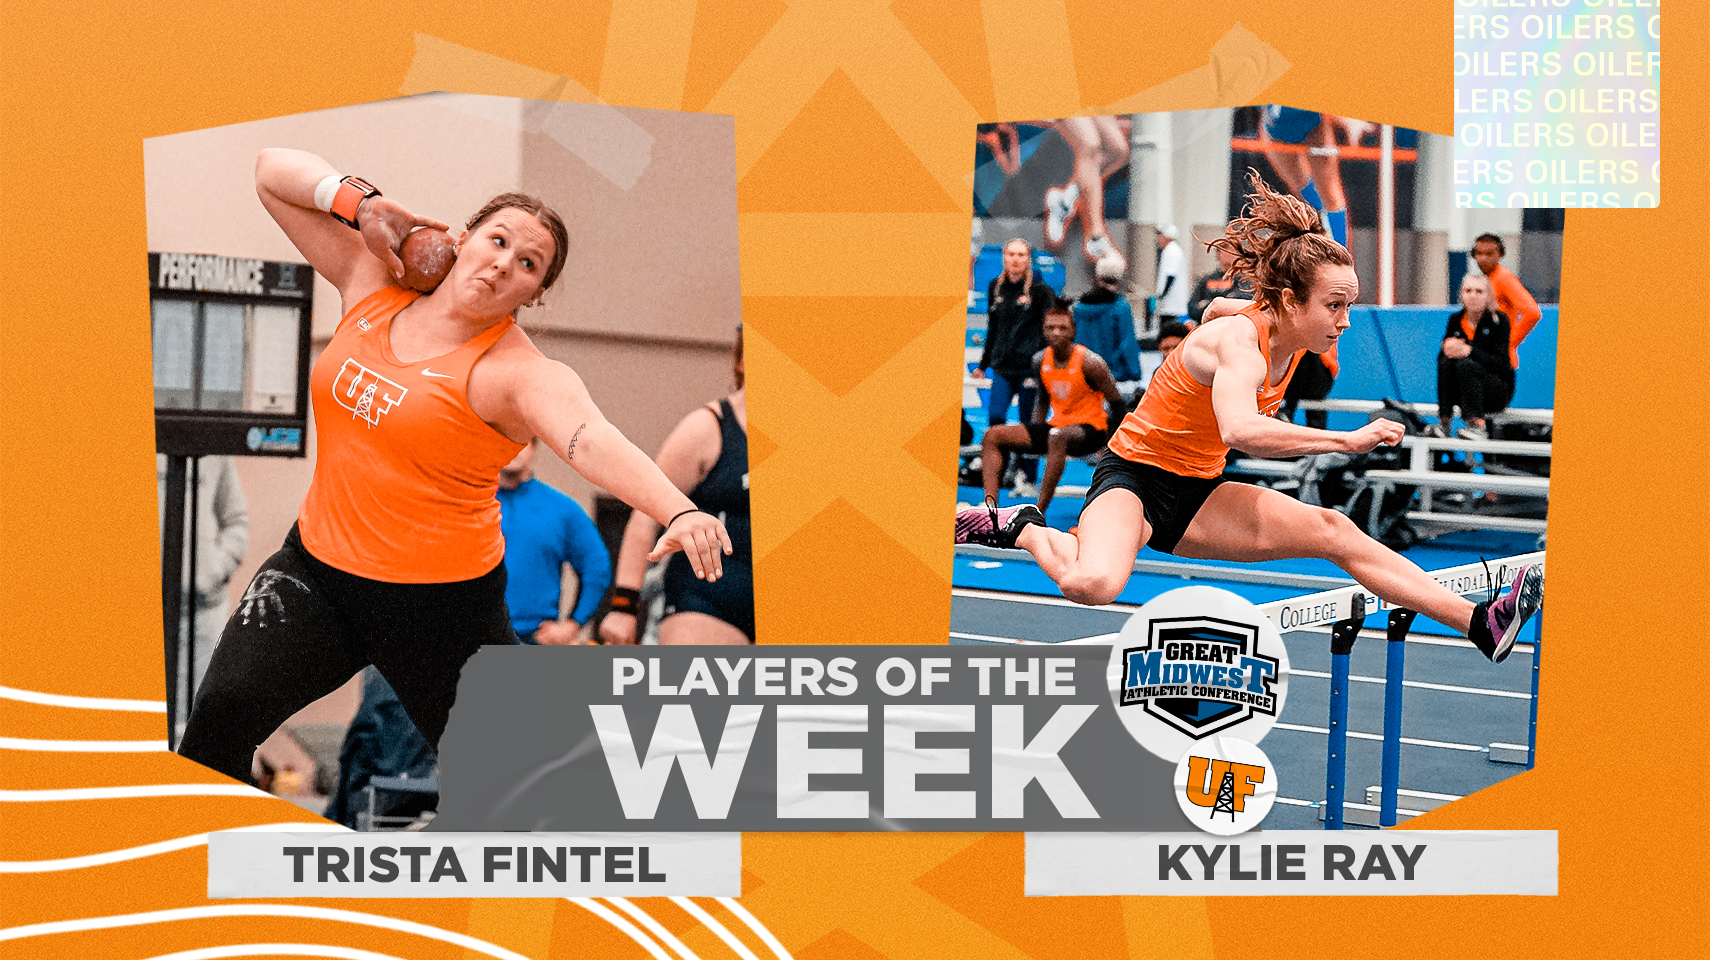 Fintel and Ray Earn Athlete of the Week Honors